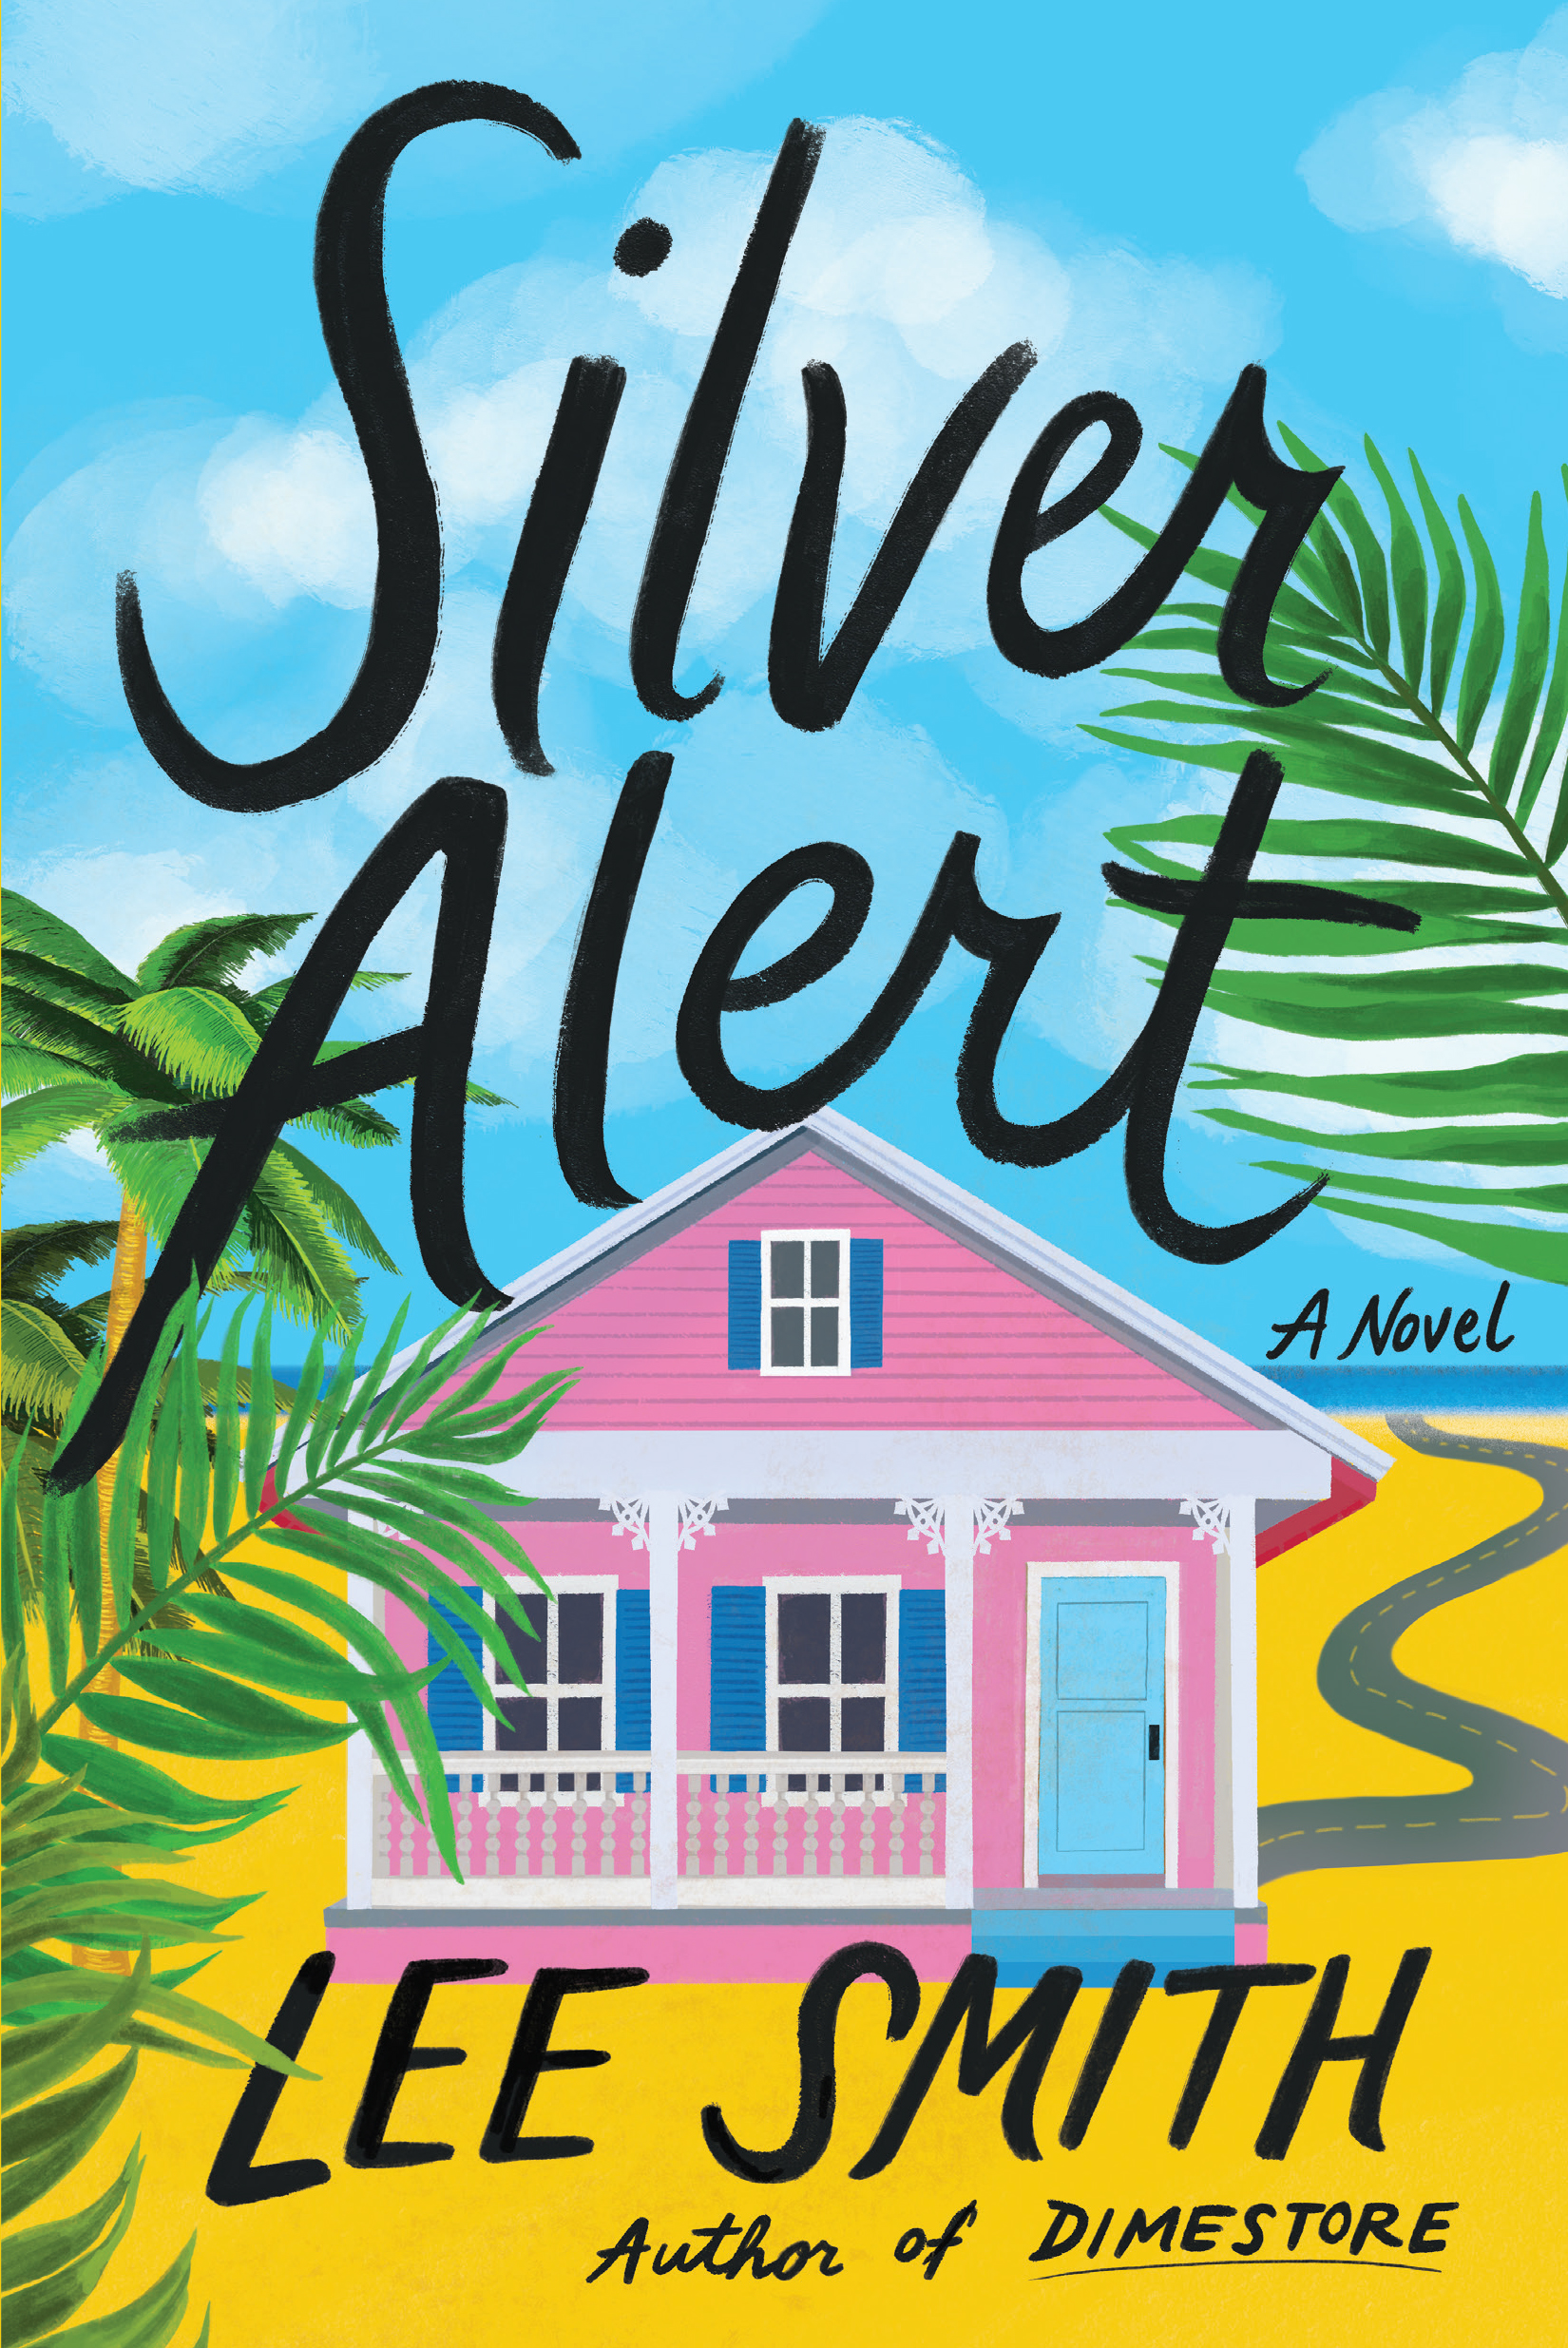 Silver Alert by Lee Smith | Hachette Book Group